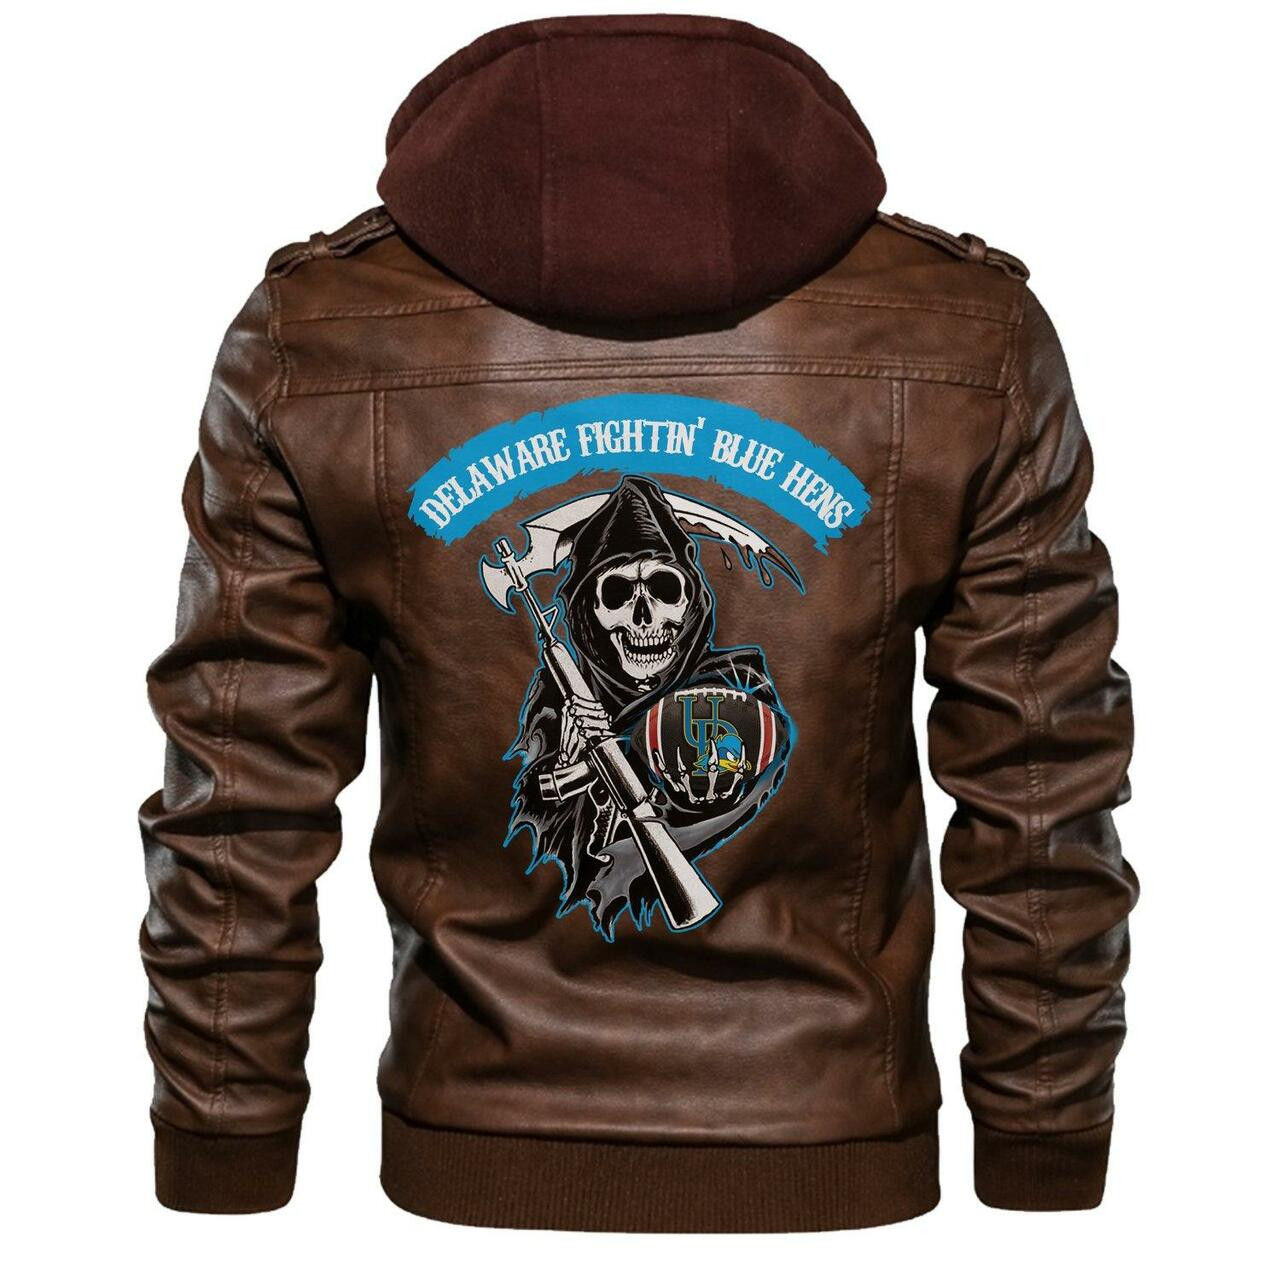 Don't wait another minute, Get Hot Leather Jacket today 84